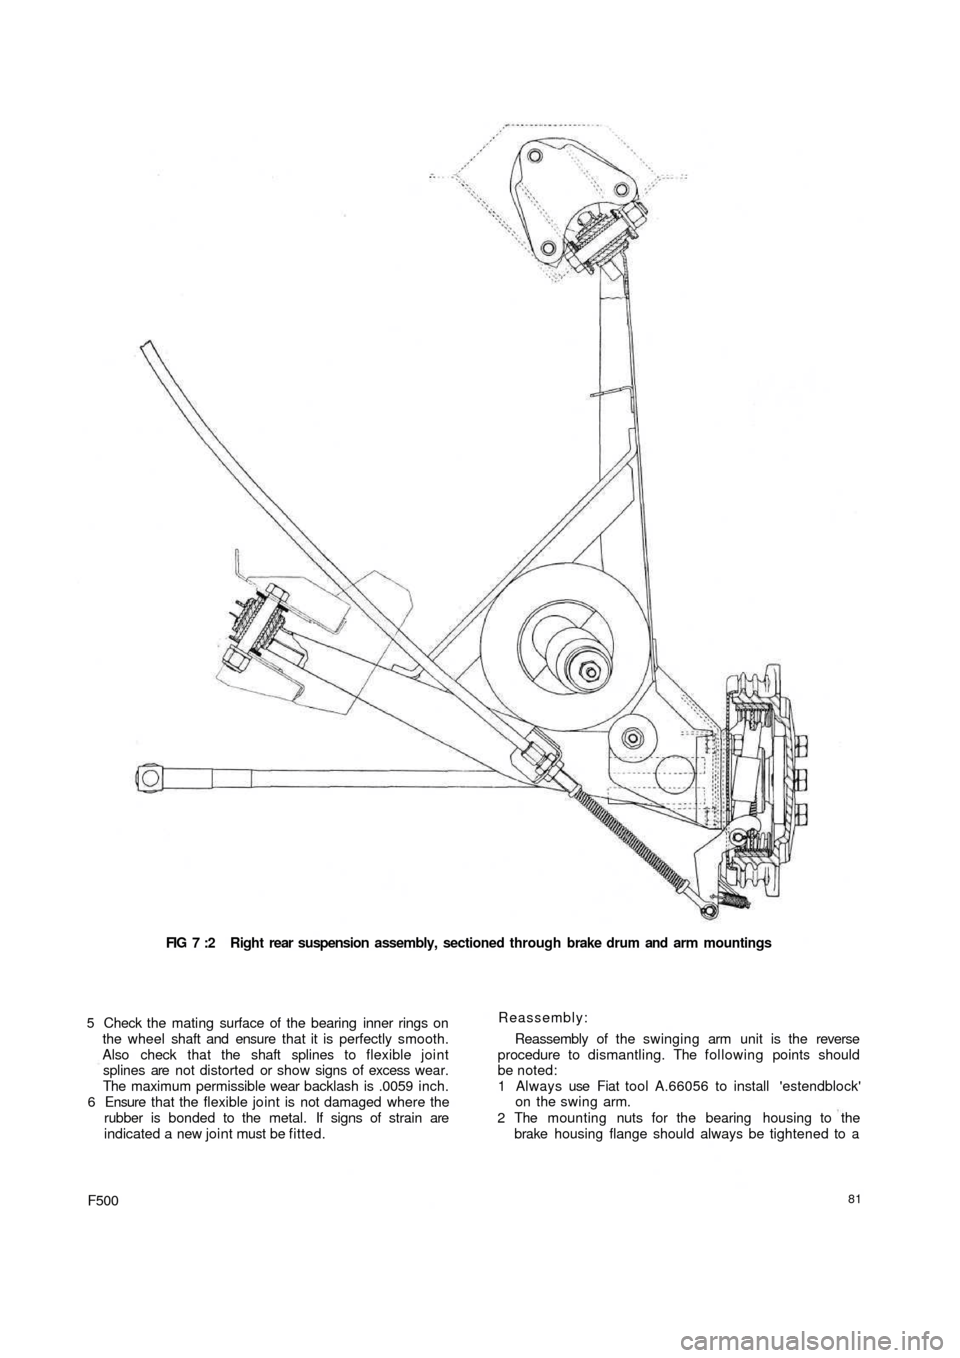 FIAT 500 1957 1.G Workshop Manual FIG 7 :2  Right rear suspension  assembly, sectioned through brake drum and arm mountings
5 Check the mating surface of the bearing inner rings on
the wheel shaft and ensure that it is perfectly smoot